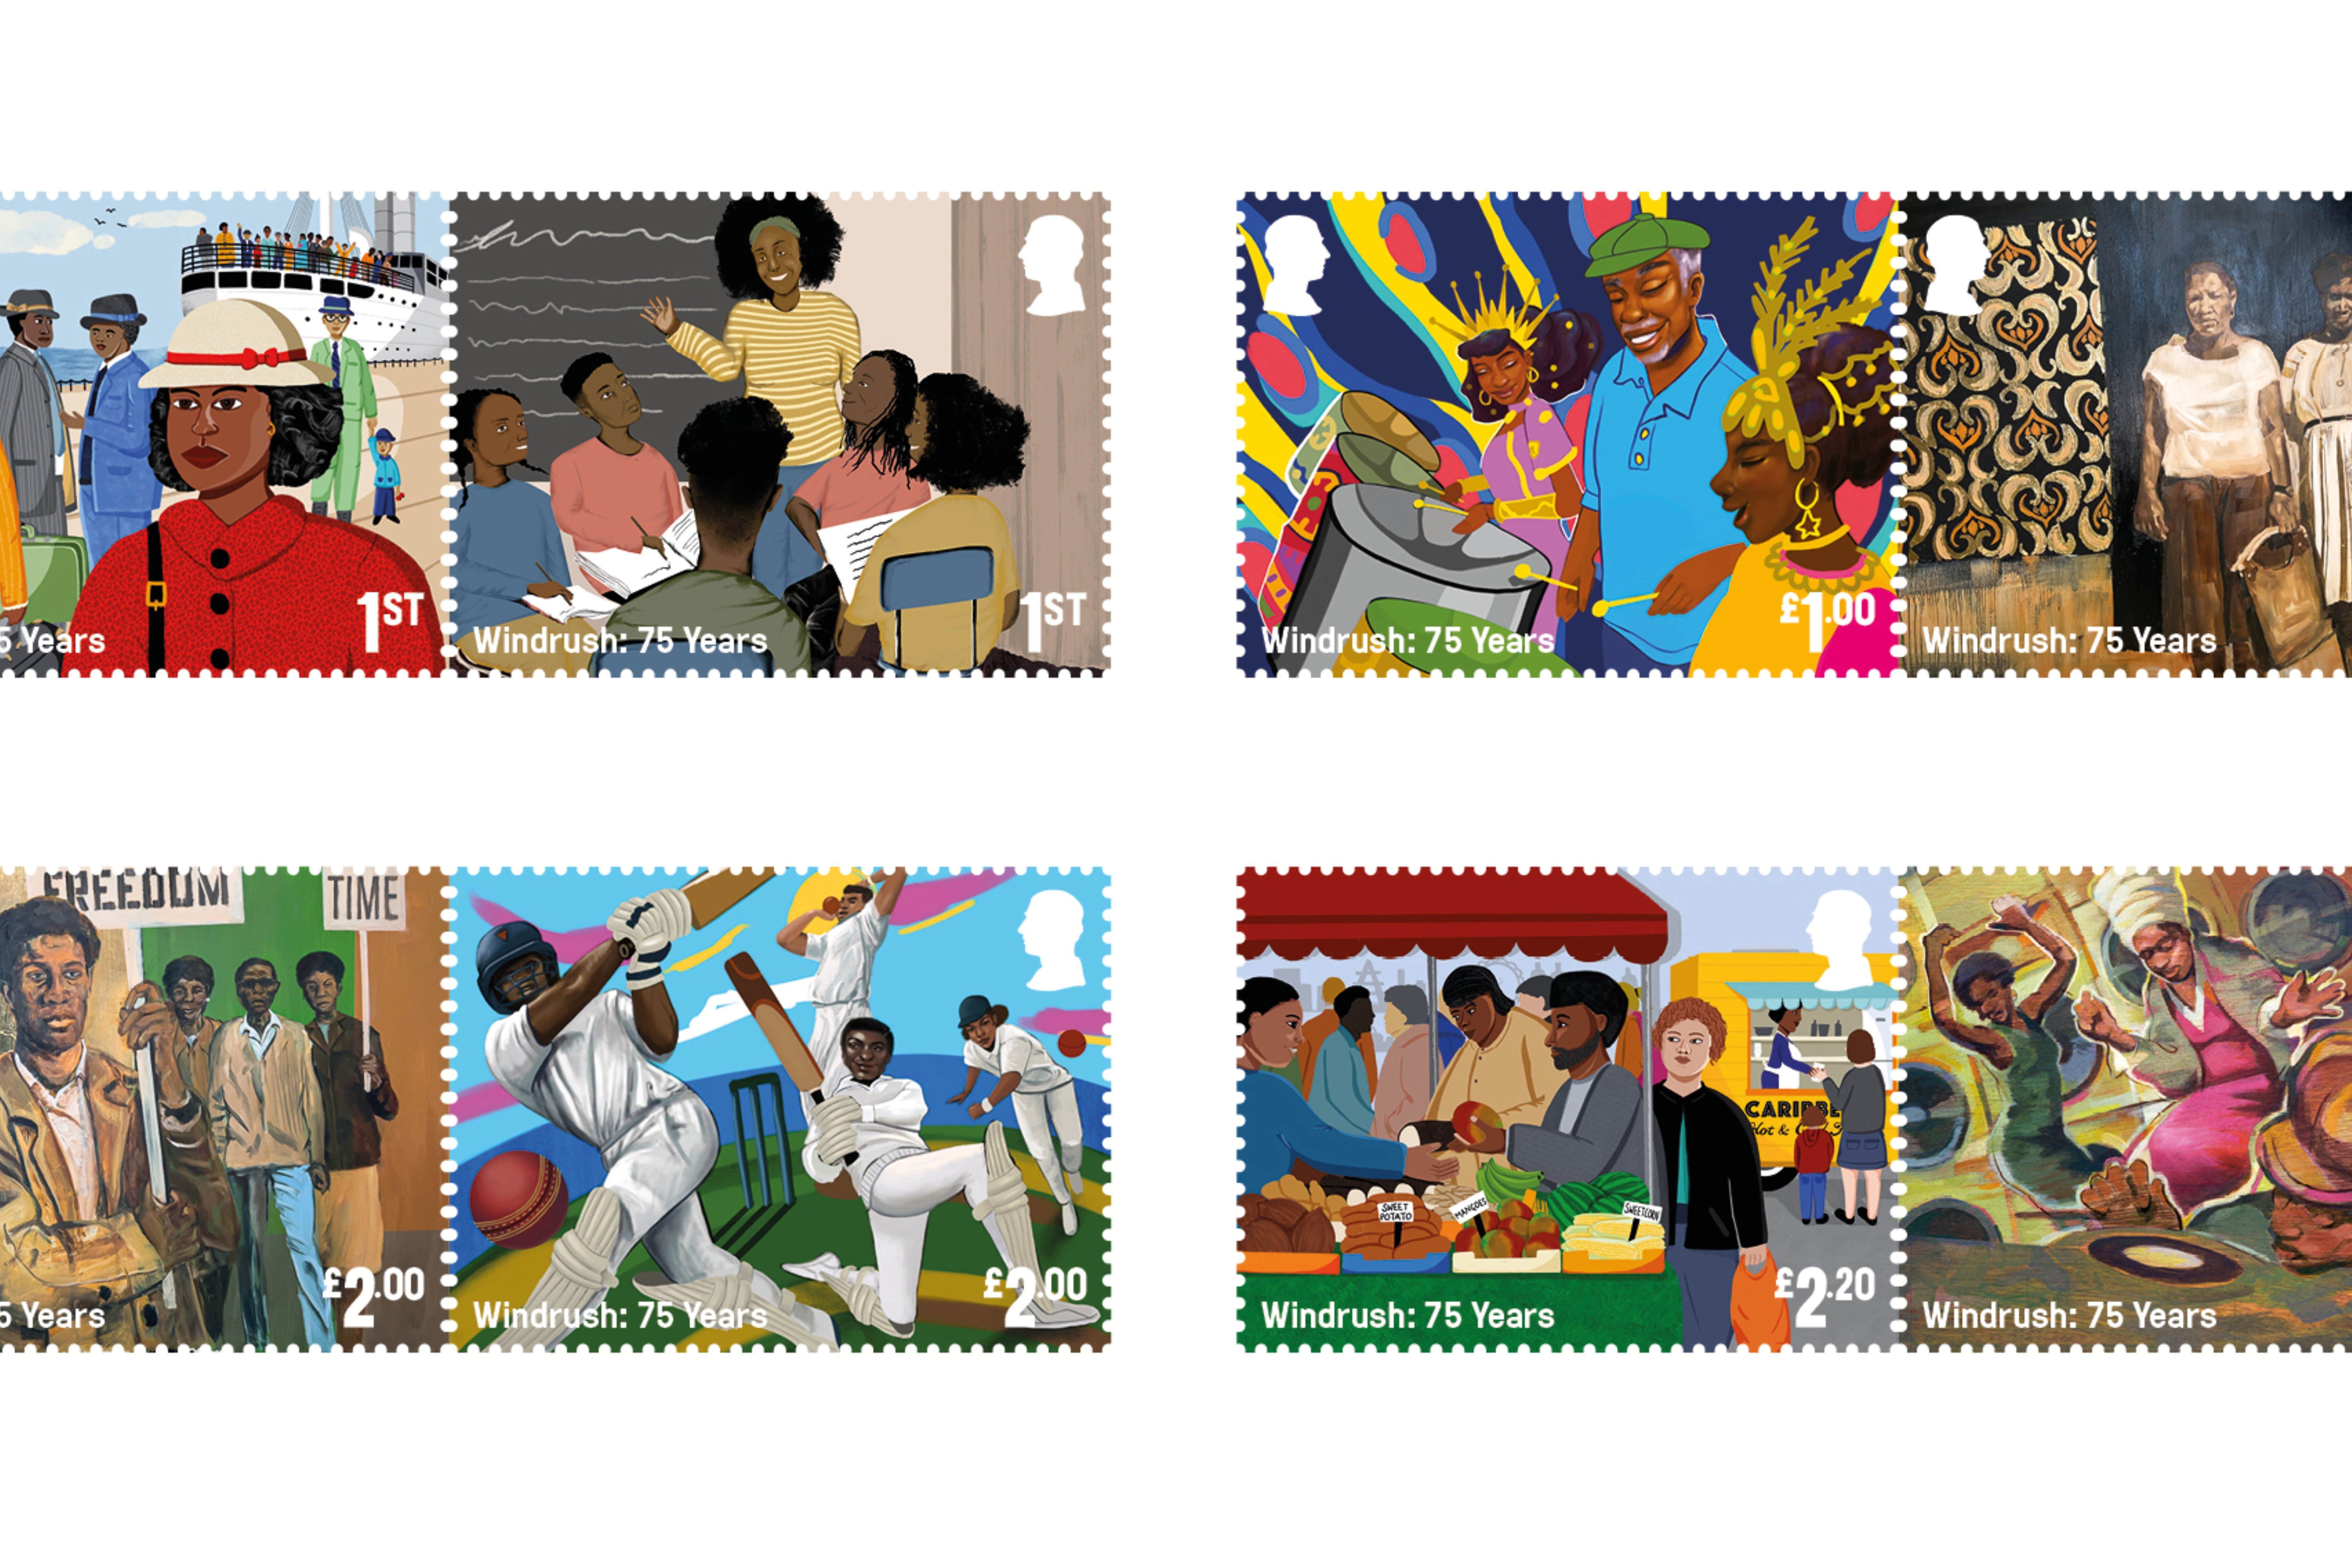 a new set of stamps released by Royal Mail making the 75th Anniversary of the arrival of MV Empire Windrush to the UK on June 22 1948 (Royal Mail/PA)